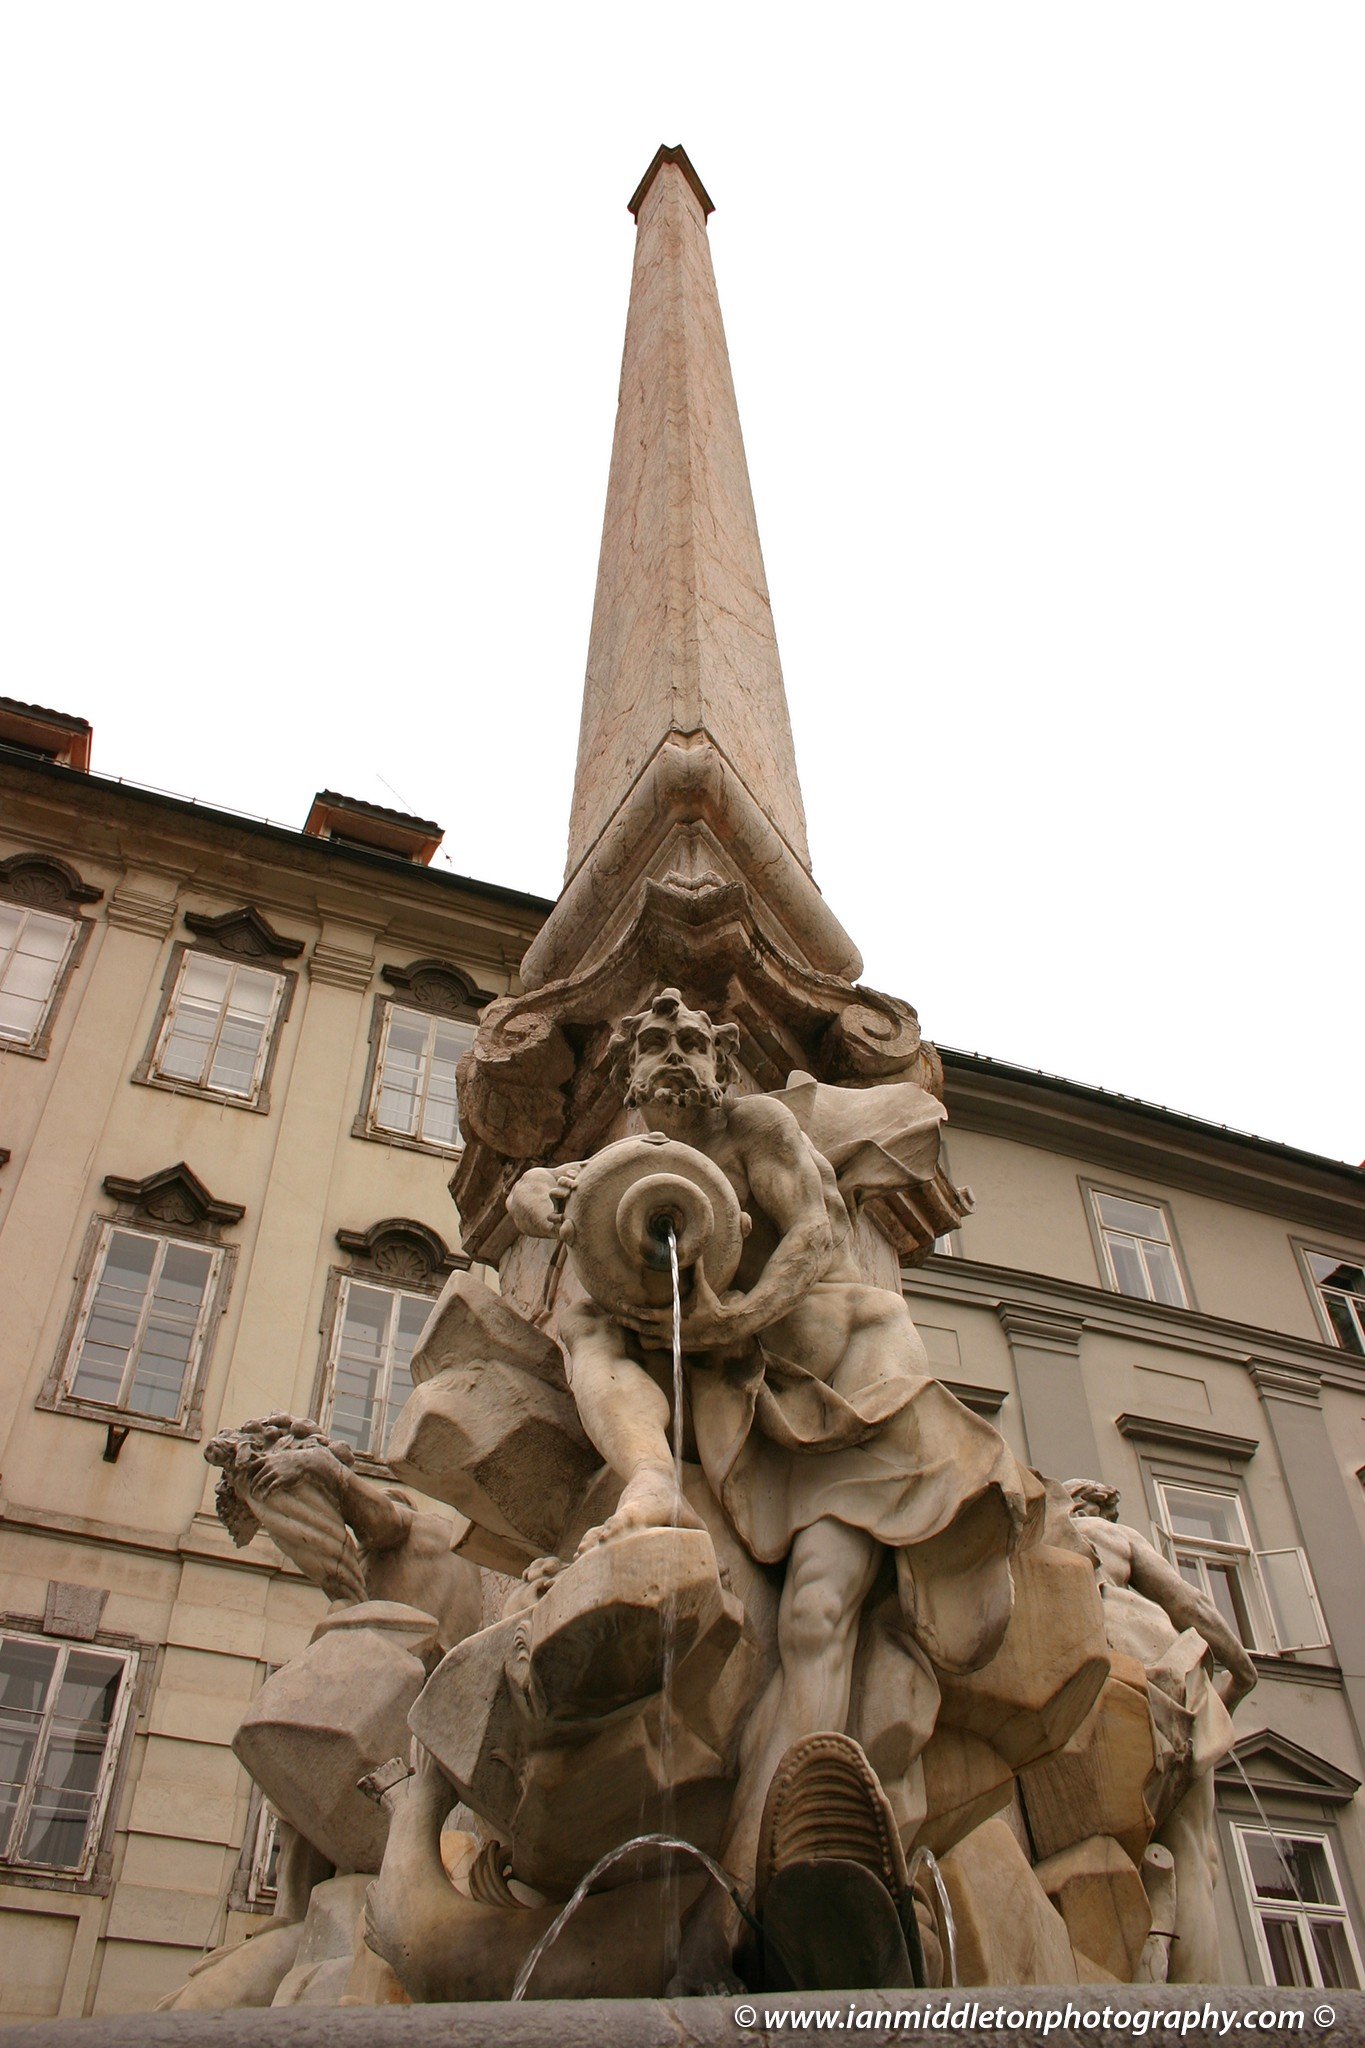 The original Robba Fountain, originally known as the Fountain of the Three Carniolan Rivers, Ljubljana, Slovenia. This was taken before it was moved to the National Gallery of Slovenia.